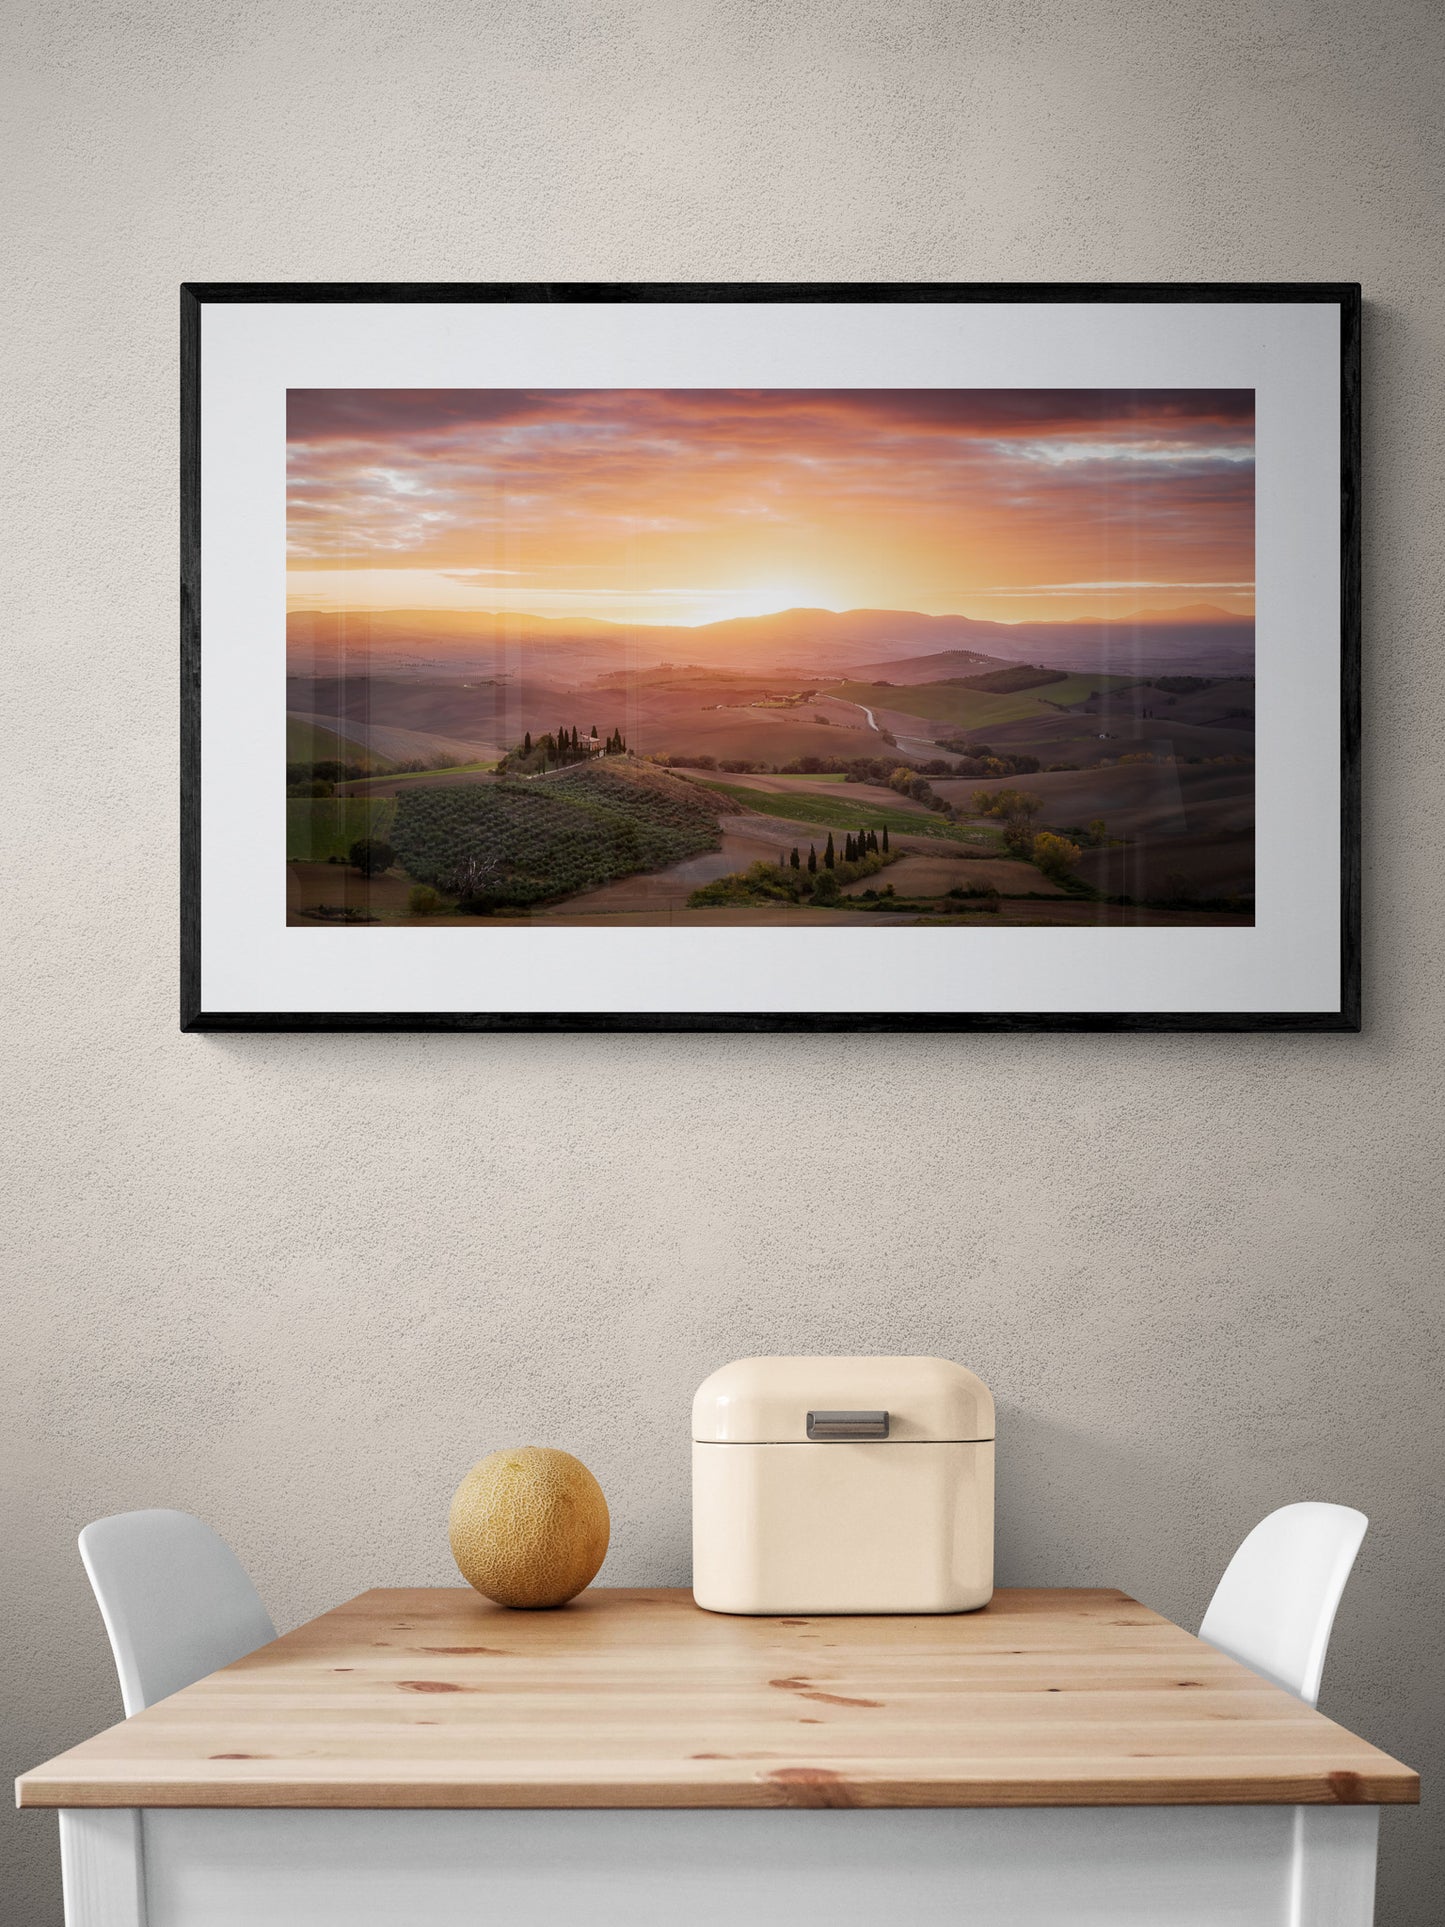 Image Title: Morning Glory Photographer: Marcus Danz Location: Val D'orcia, Italy Image description: The rolling hills of Tuscany and Podere Belvedere are caressed by the soft light of the morning sky. High quality Fine Art print up to 36 inch / around 90 centimeters on Hahnemühle paper available.  Large variant over kitchen table.